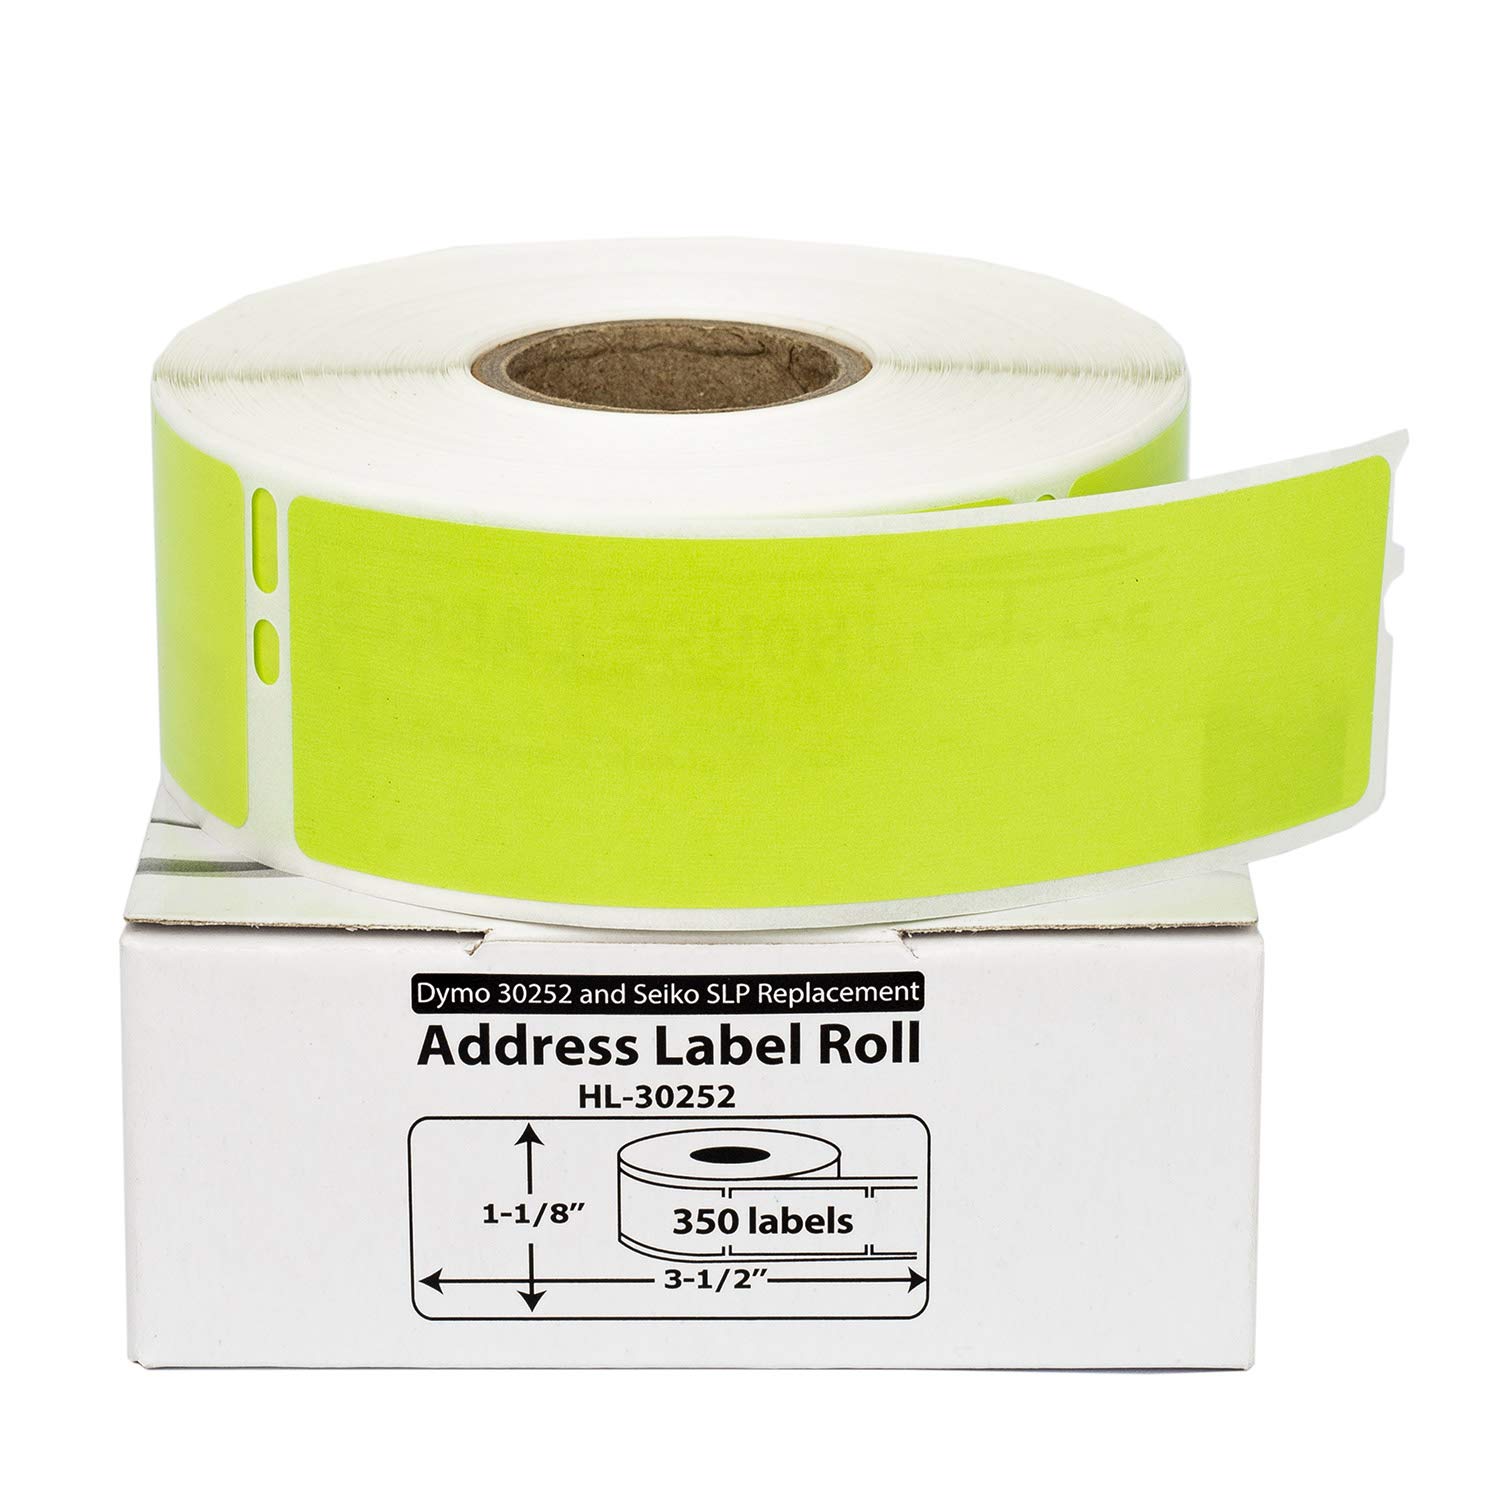 HOUSELABELS Compatible DYMO 30252 Green Address Labels (1-1/8" x 3-1/2"), Strong Permanent Adhesive, Compatible with DYMO LW 450, 4XL, Rollo & Zebra Desktop Printers, 6 Rolls /2100 Labels